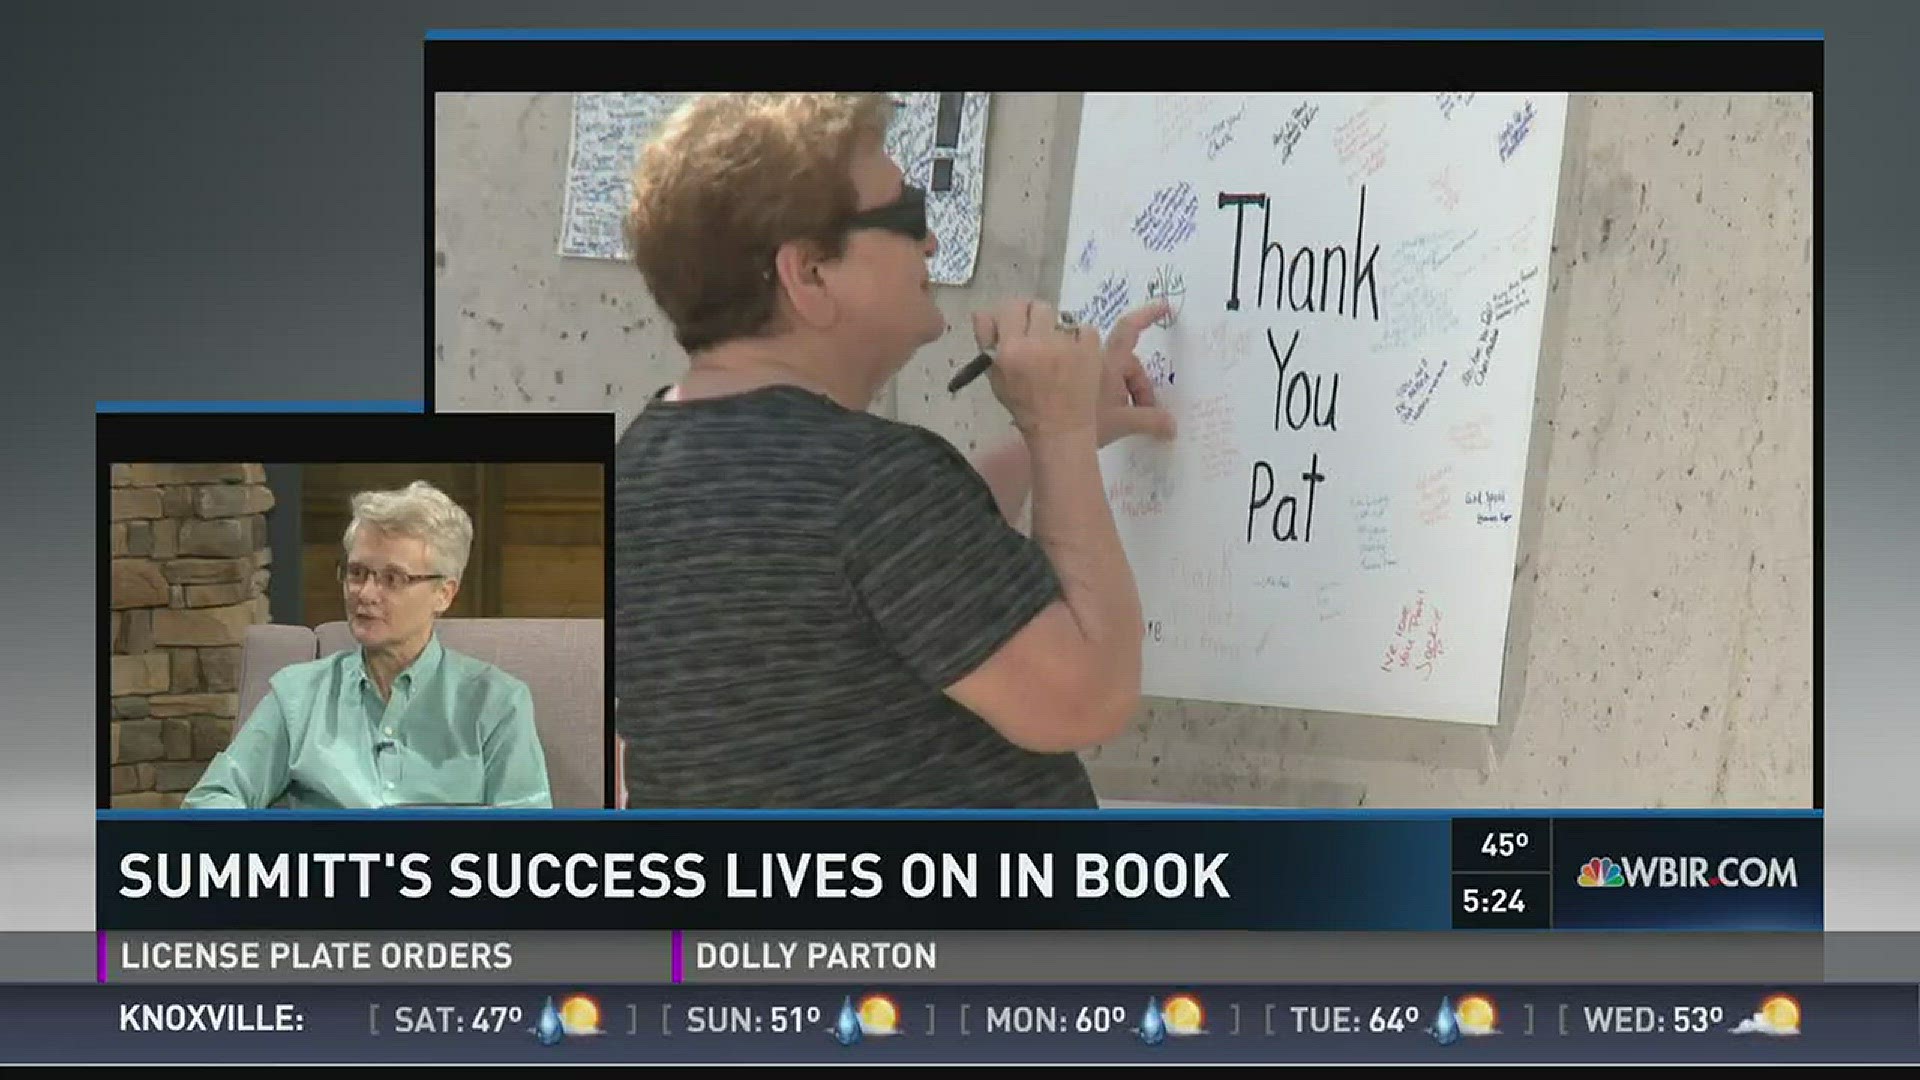 Maria Cornelius talks about her book documenting "The Final Season" of Pat Summitt as head coach of the Lady Vols